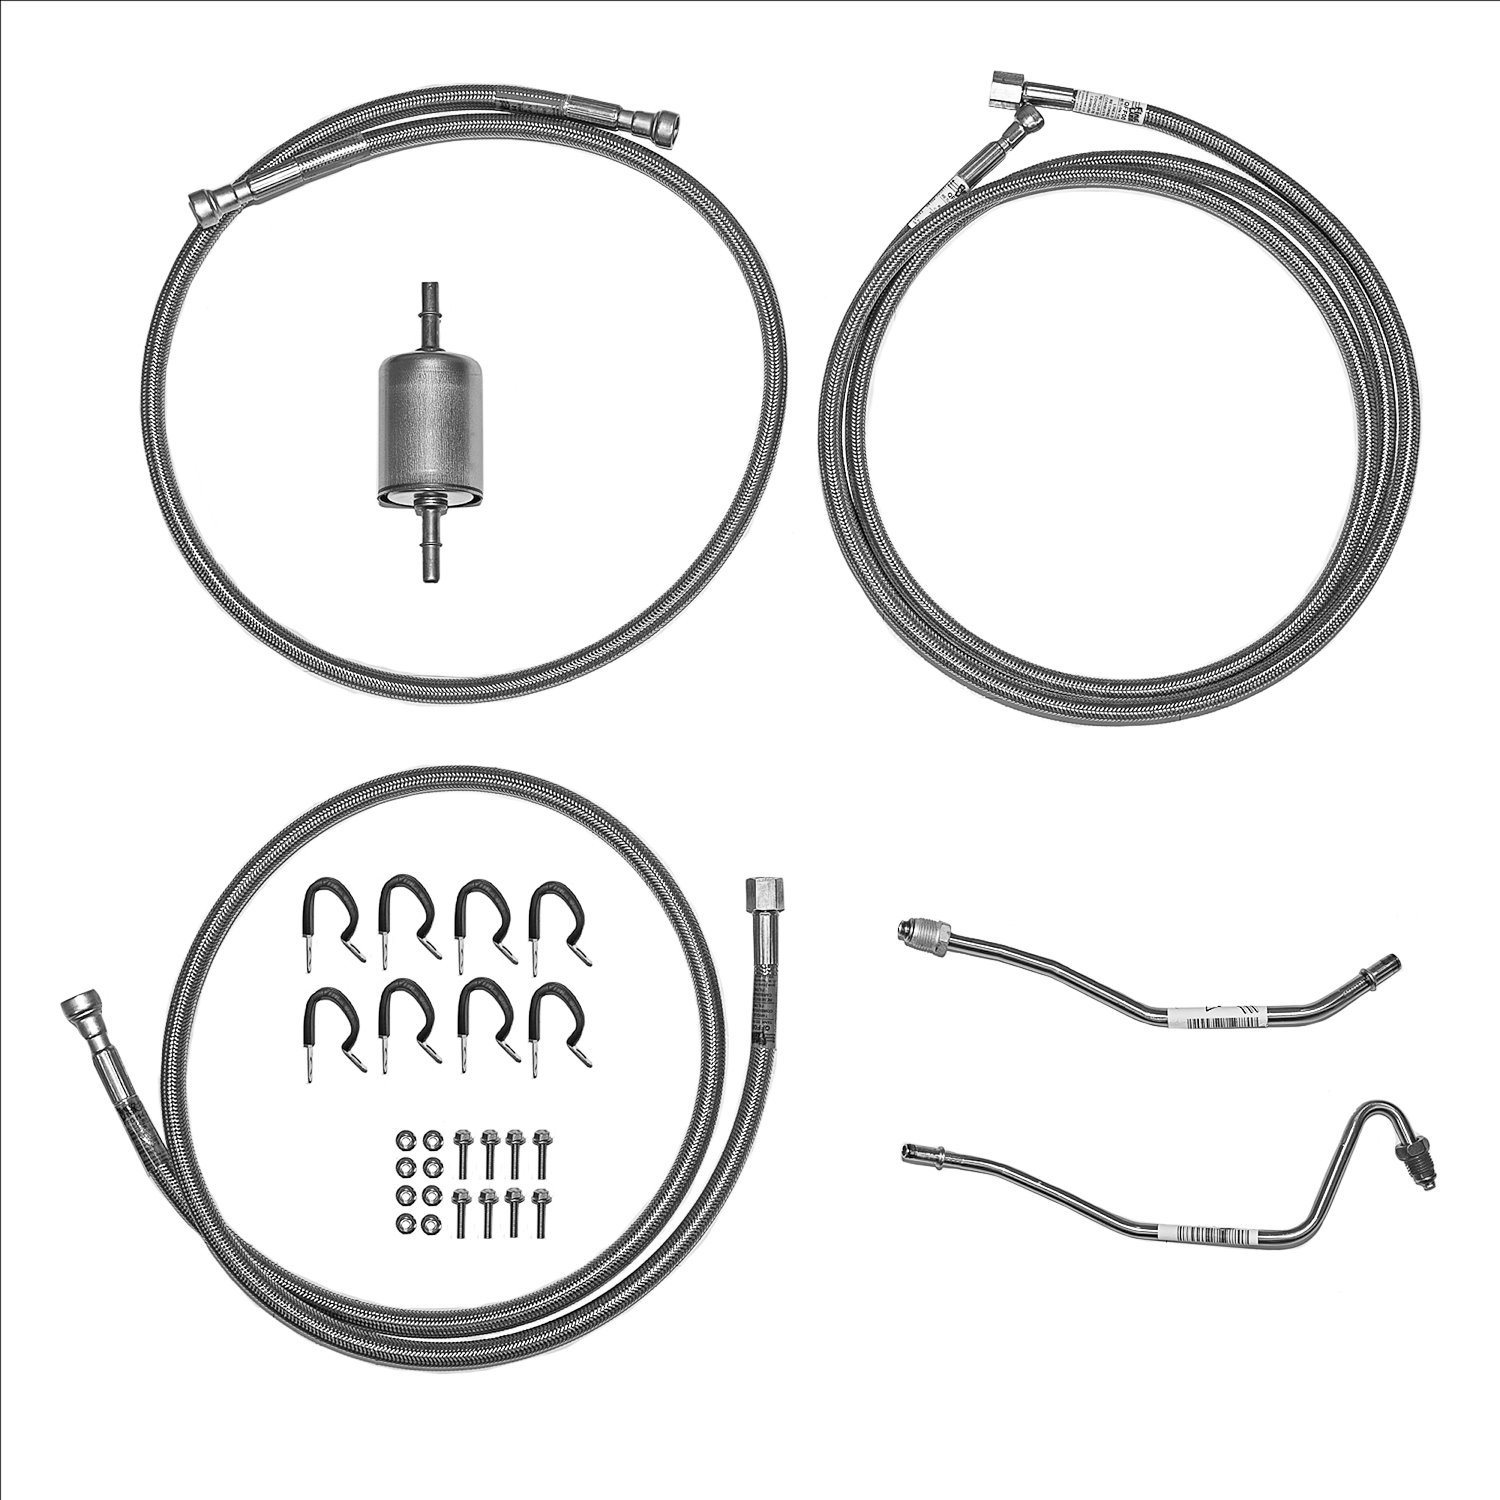 Quick-Fix Complete Fuel Line Kit for 1988-1995 GM K1500, K2500, K3500 Reg. Cab Long Bed Trucks w/V8 Engine [Braided Stainless]